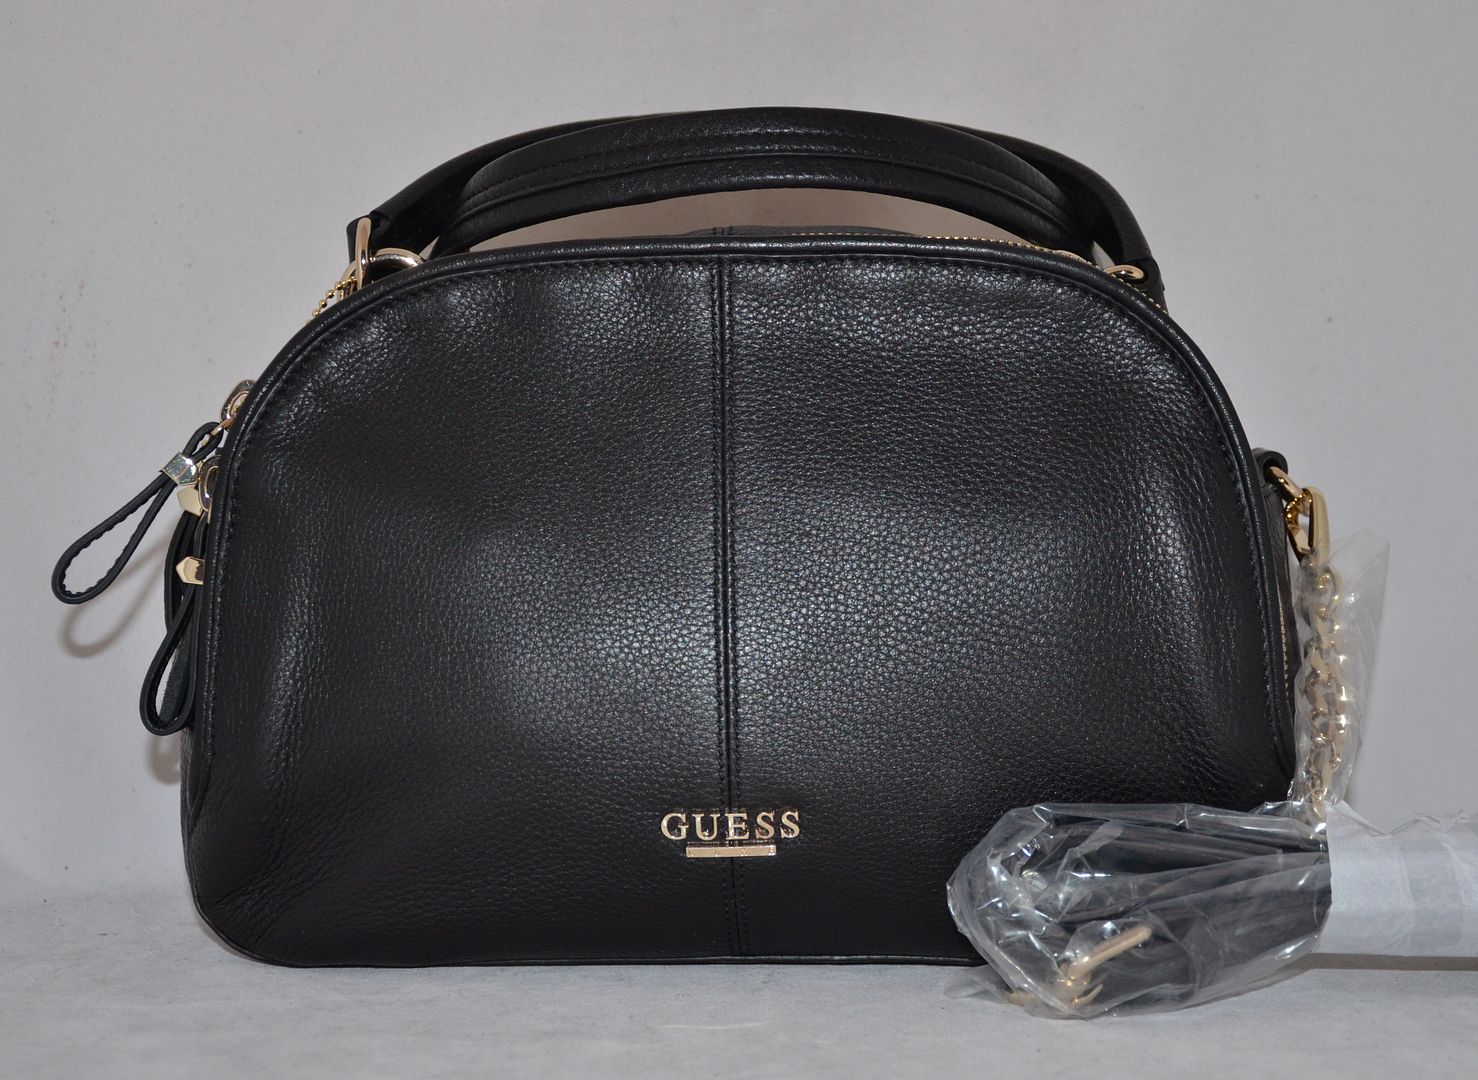 $178 GUESS Luxe Holiday Group Leather Satchel Shoulder Bag Sac Purse Genuine New | eBay